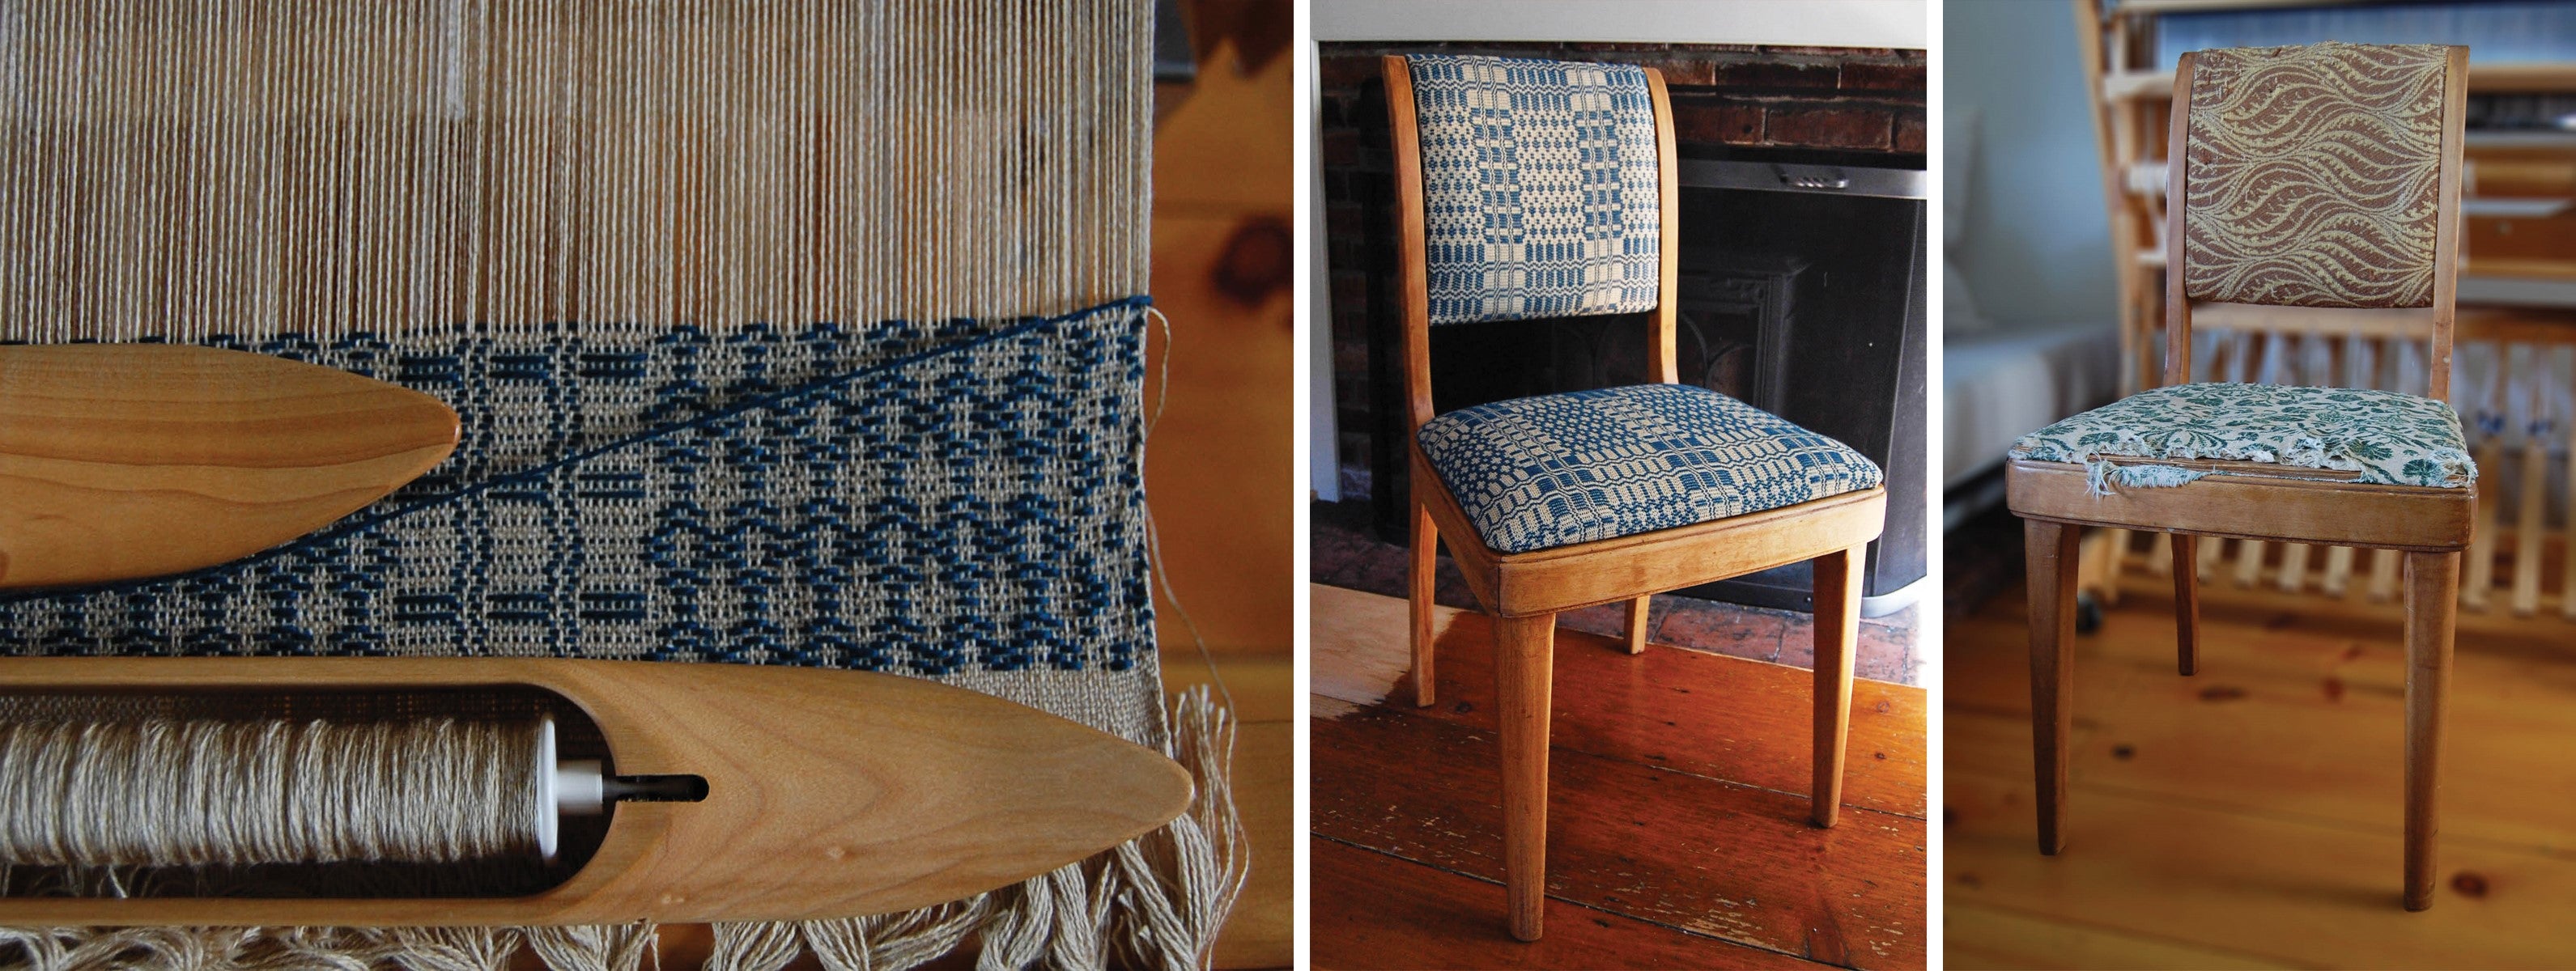 Reupholstering a Chair with Overshot Fabric – Schacht Spindle Company